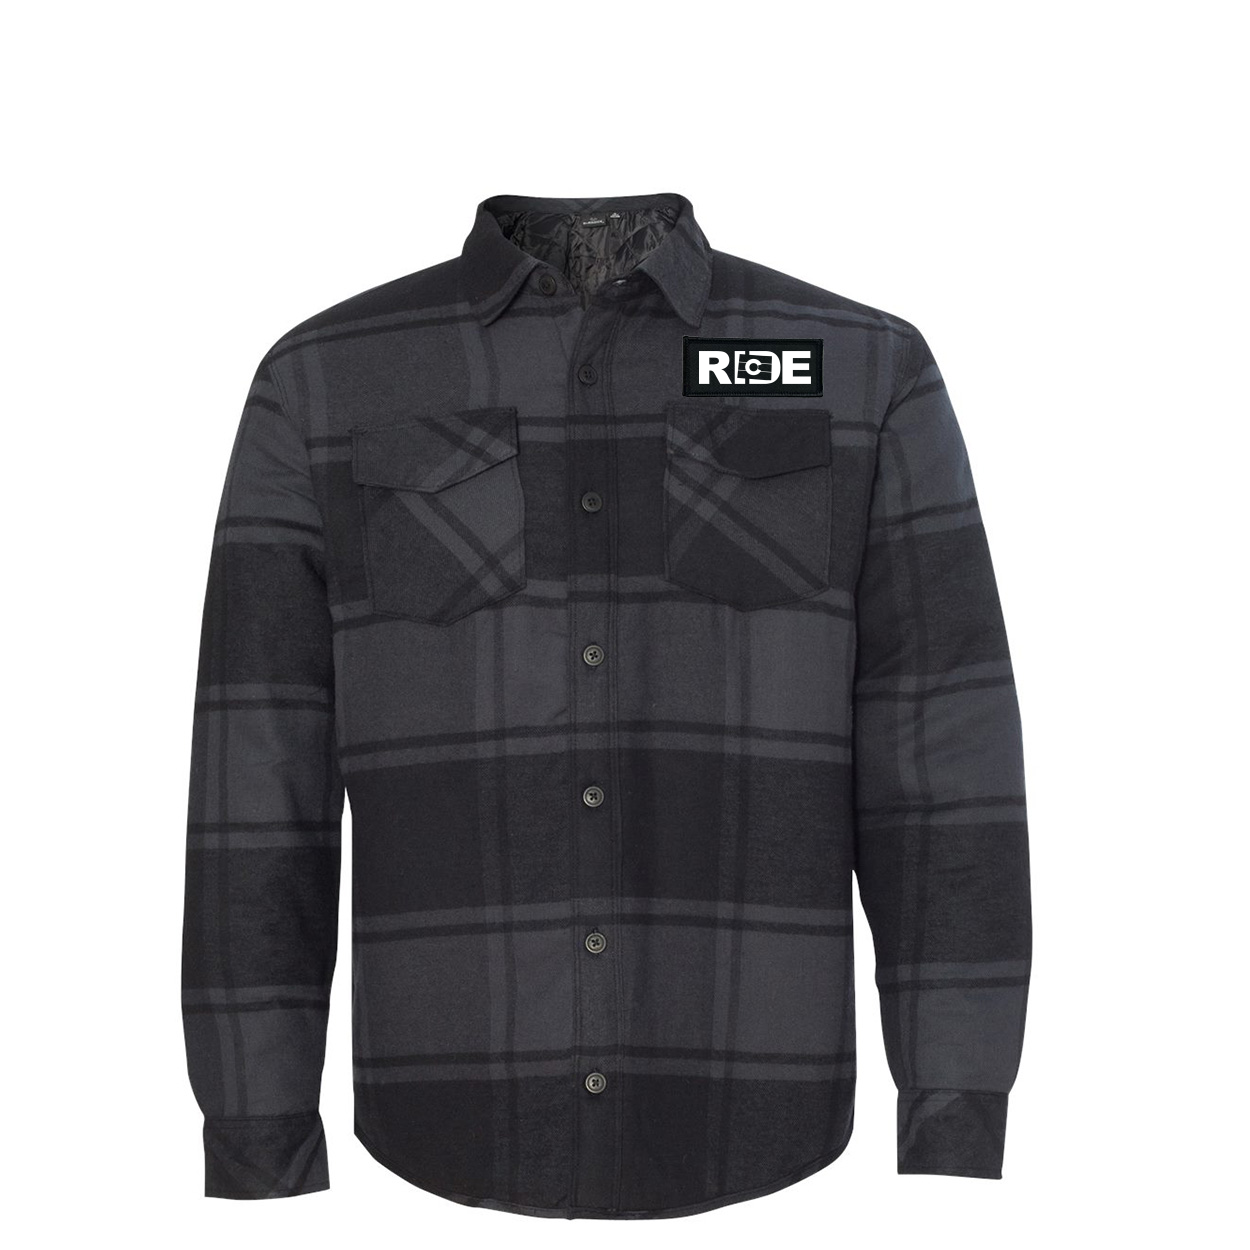 Ride Colorado Classic Unisex Woven Patch Quilted Button Flannel Jacket Black/Plaid (White Logo)